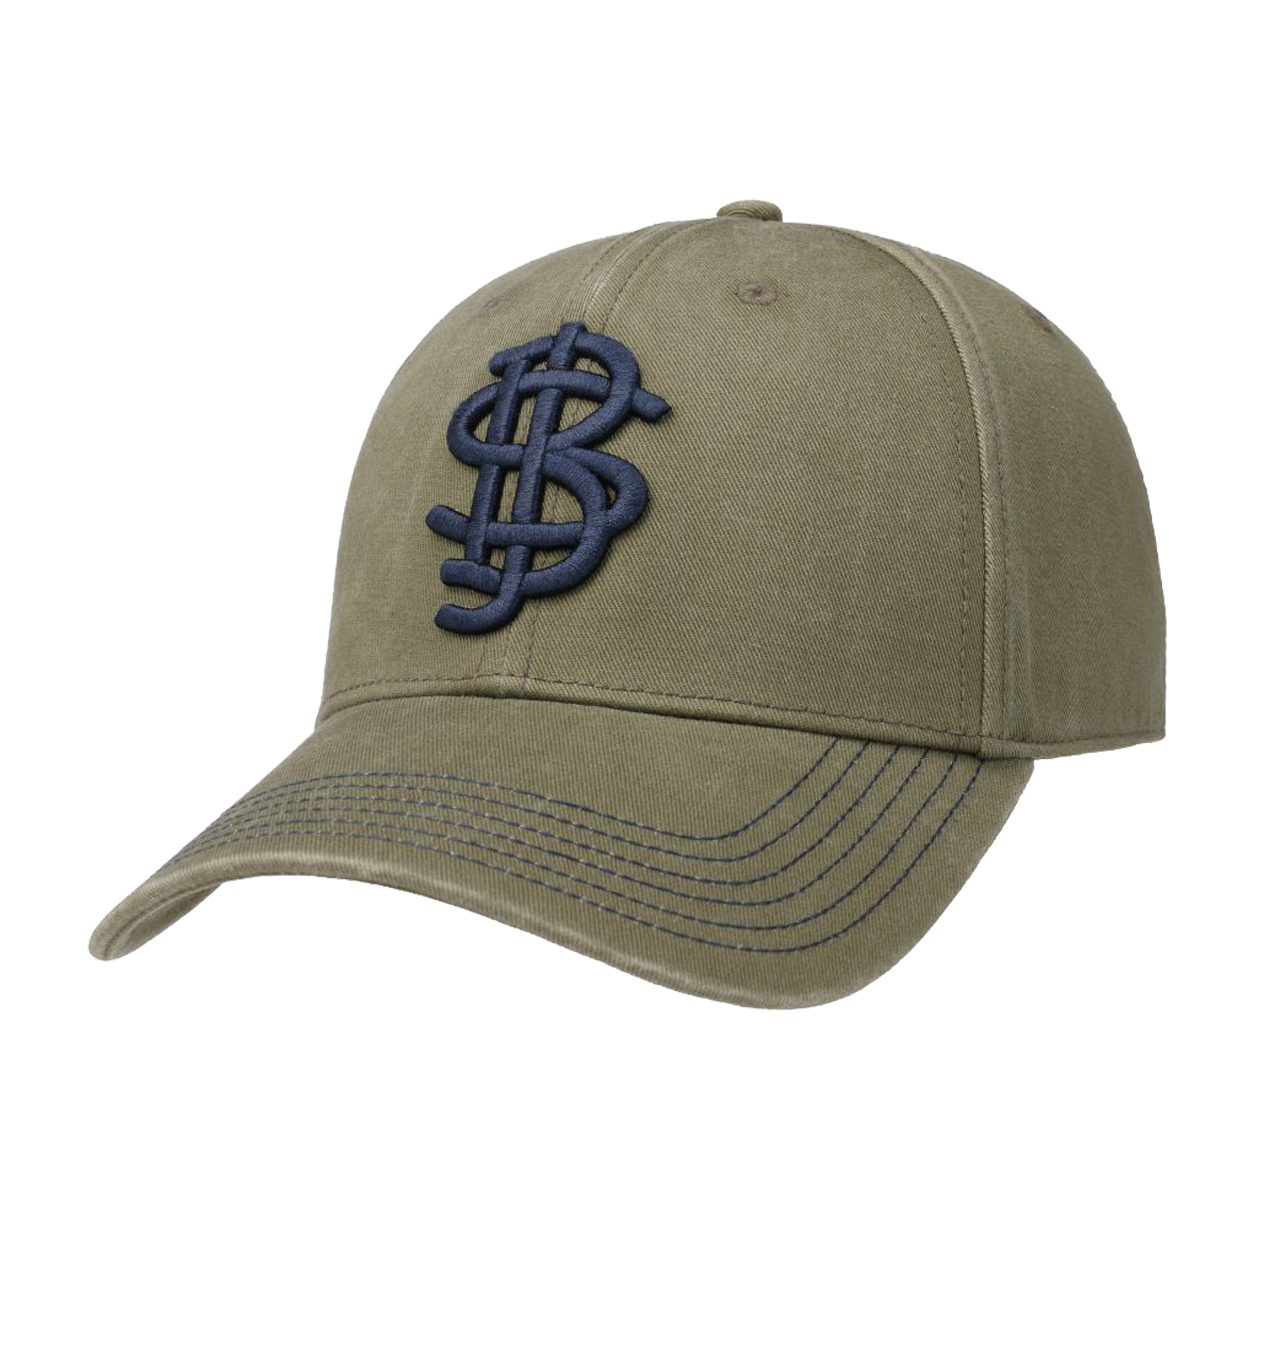 Stetson - Stitched Logo Cap With UV Protection - Olive